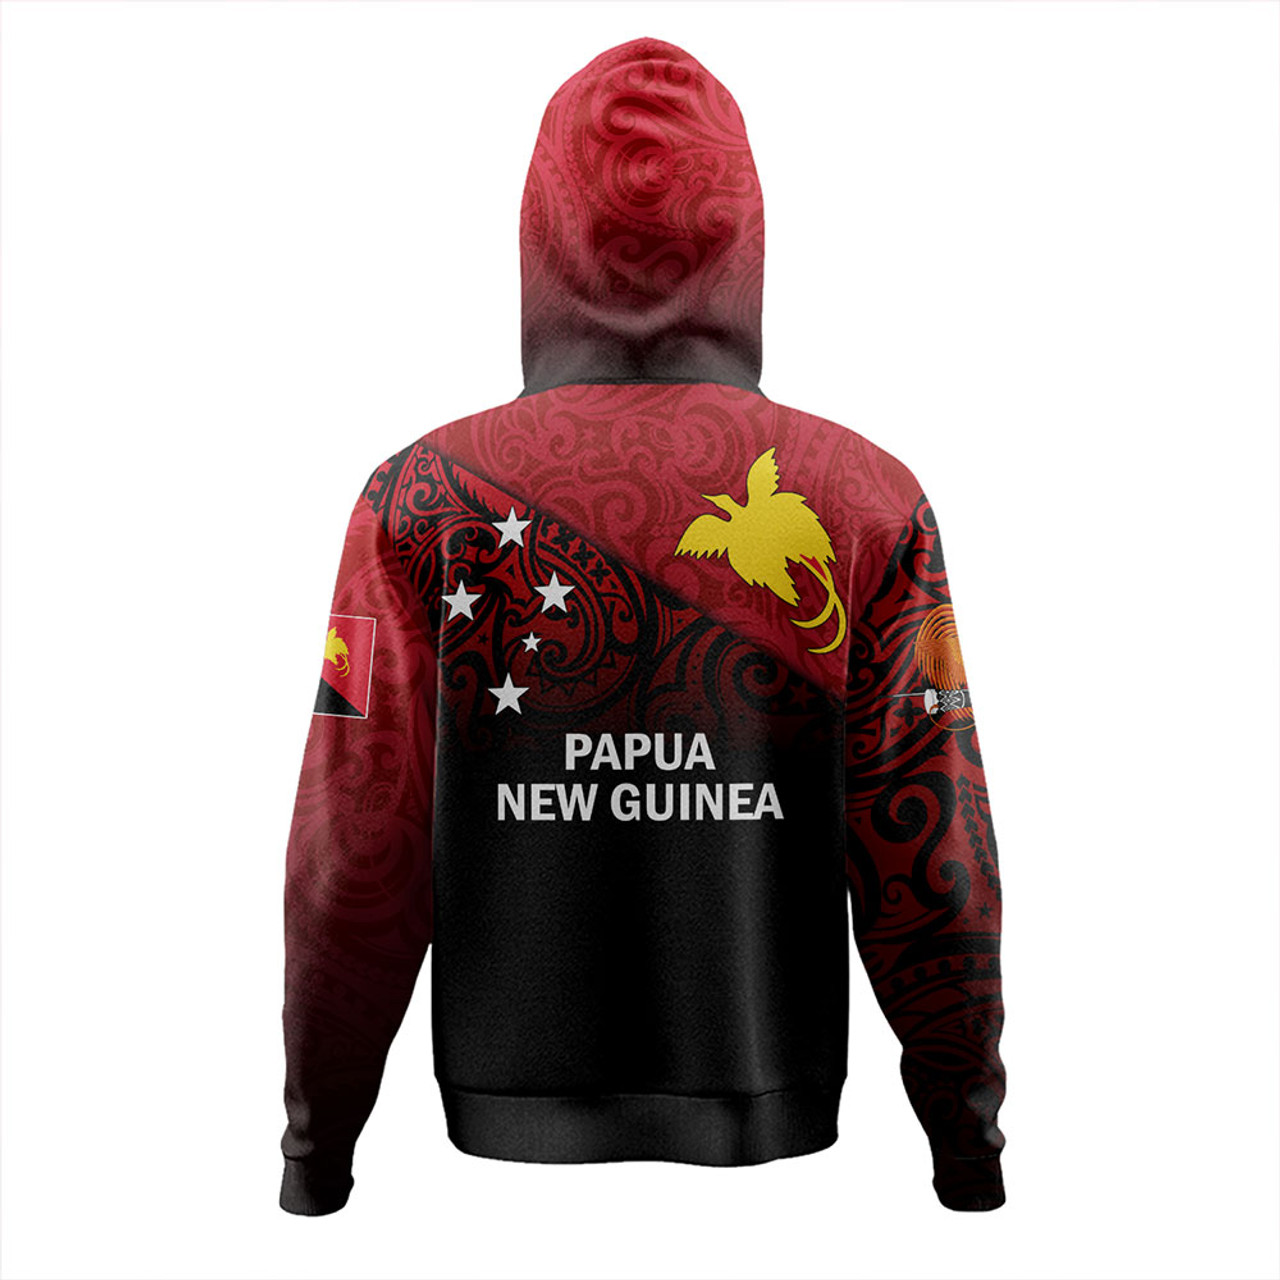 Papua New Guinea Hoodie - PNG Flag Color With Traditional Patterns